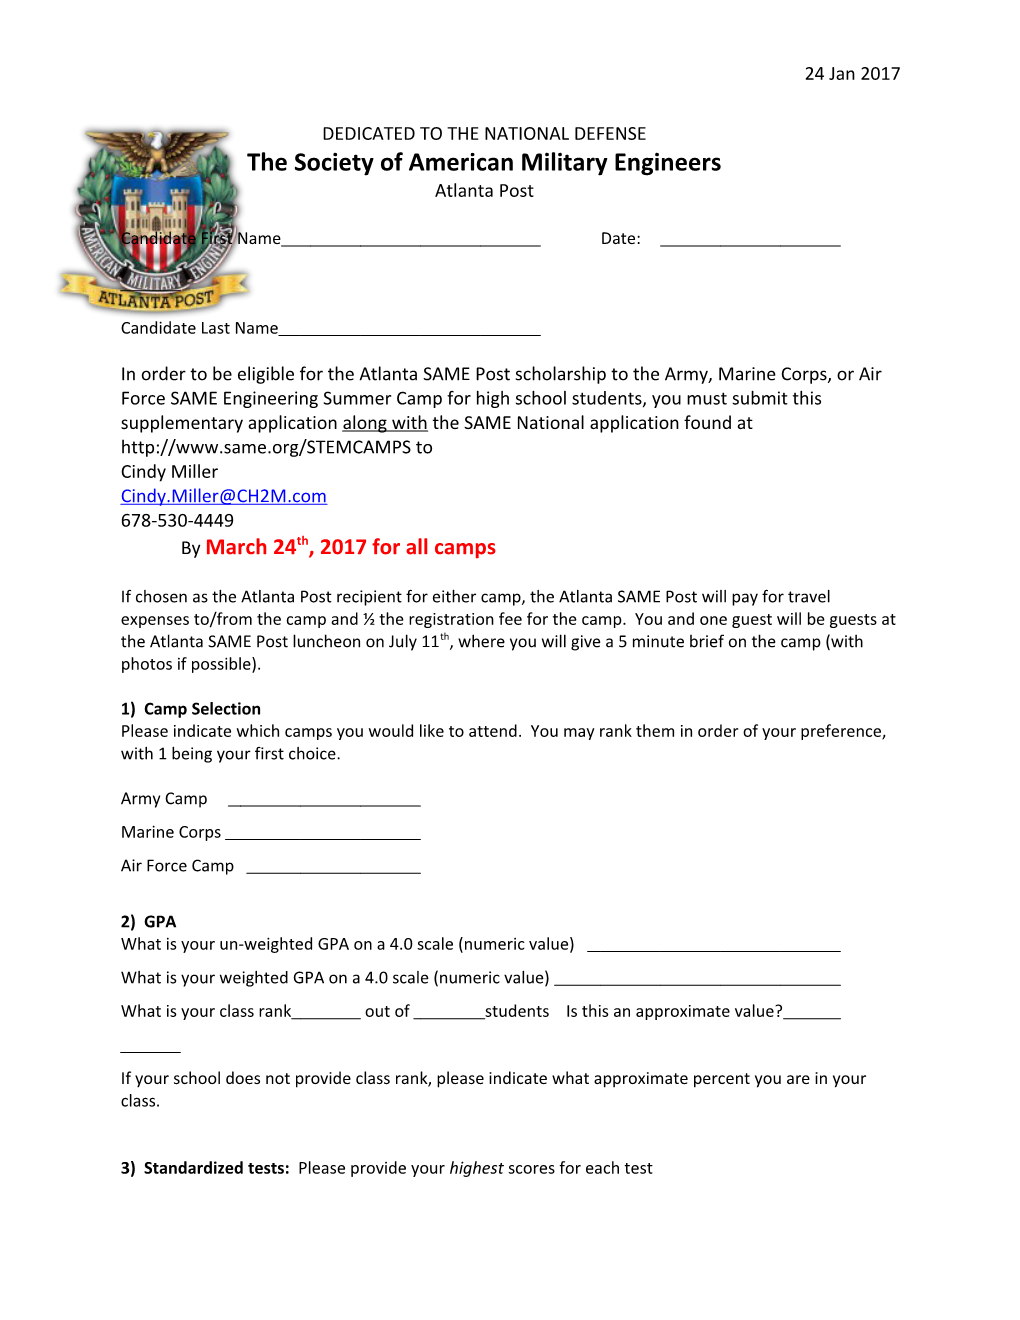 The Society of American Military Engineers